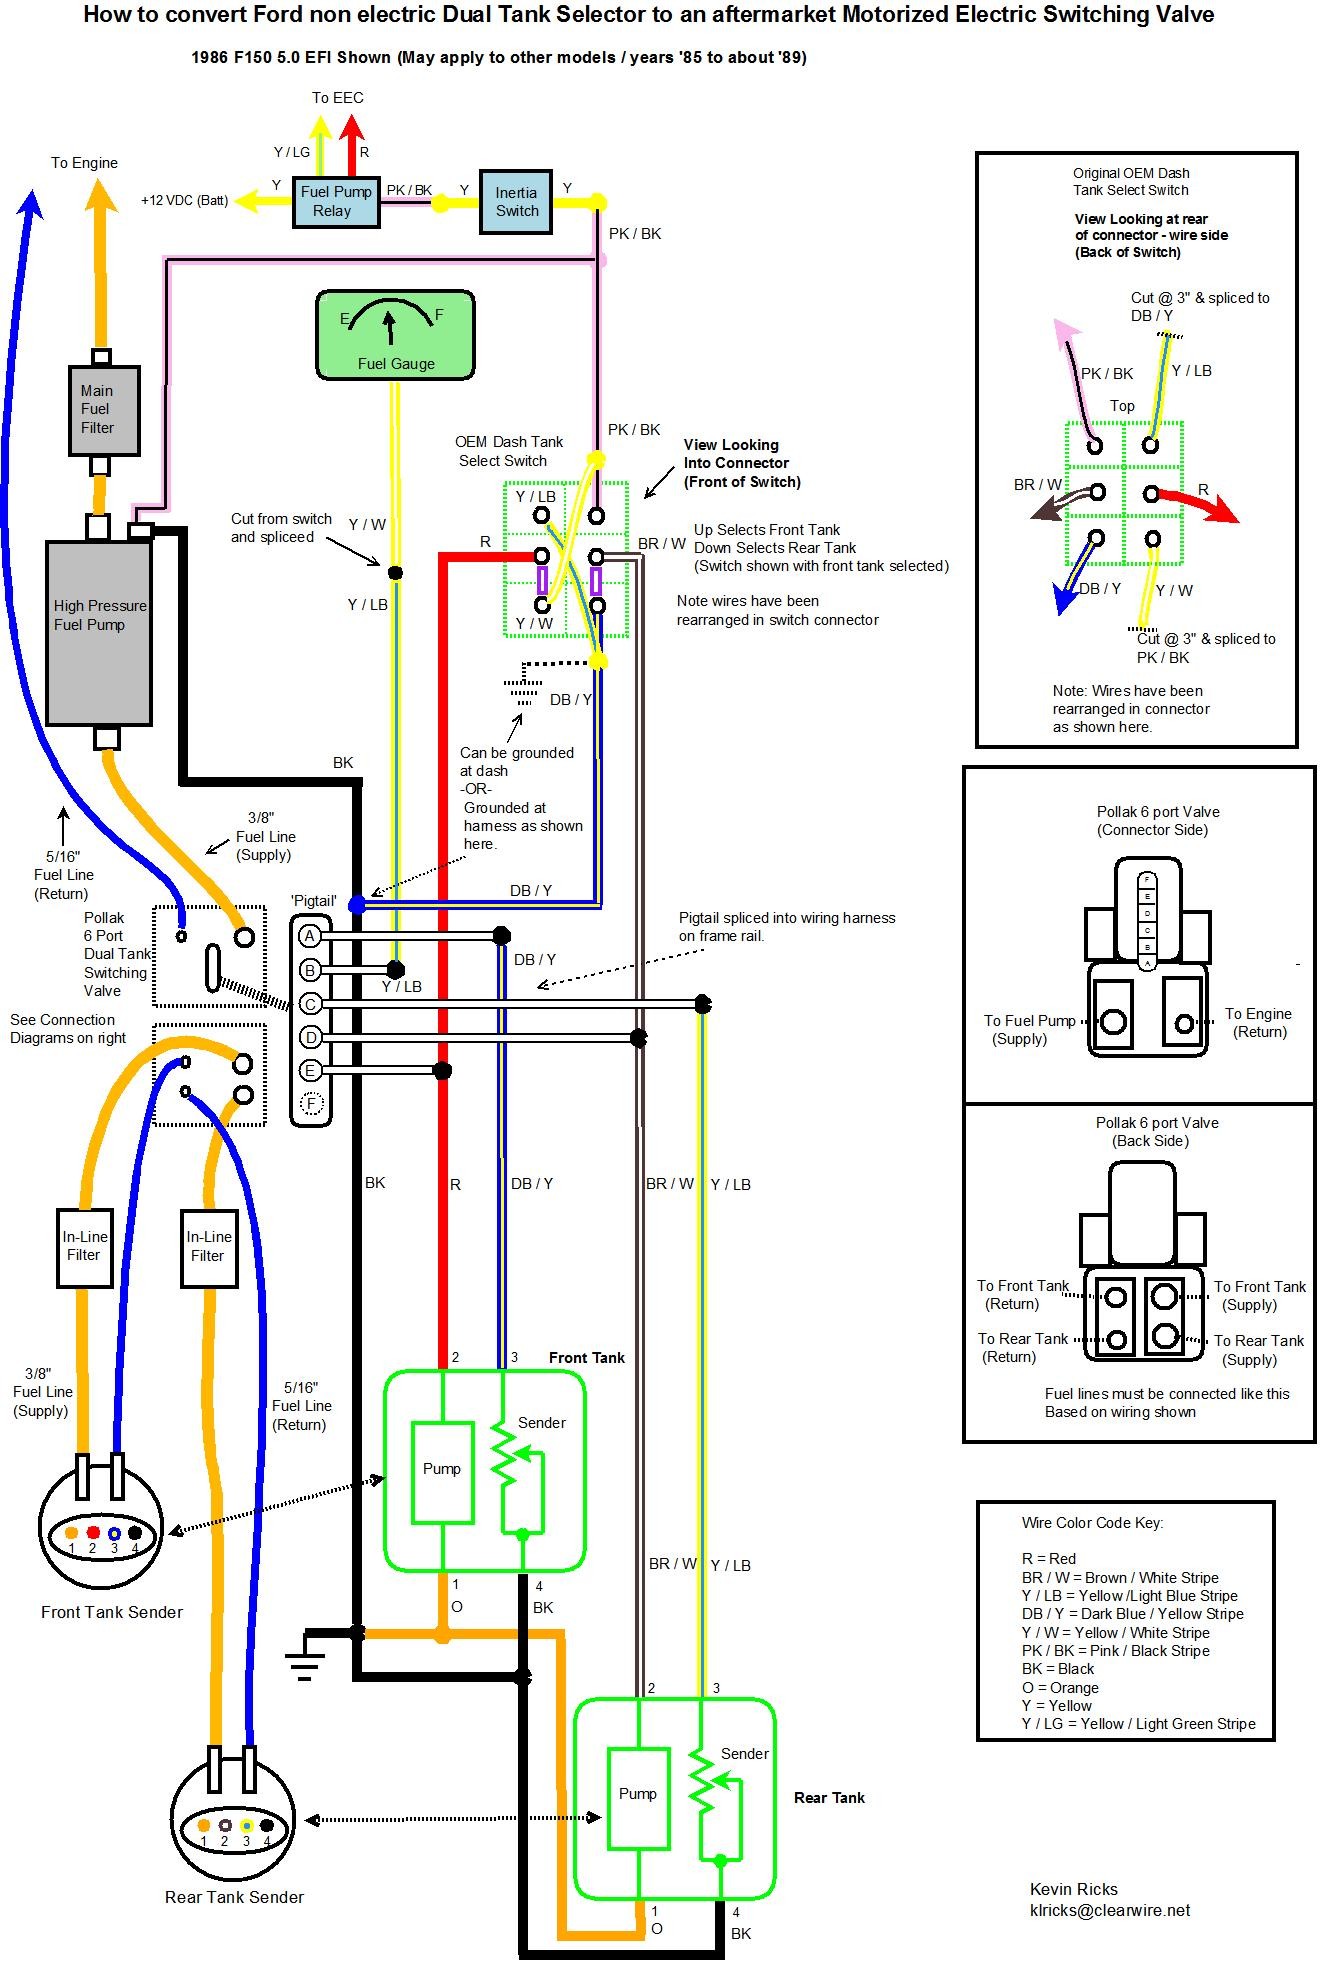 Ford 3 8 Engine Diagram Wiring Diagram for 1986 ford F250 Readingrat Net Throughout F350 to Of Ford 3 8 Engine Diagram